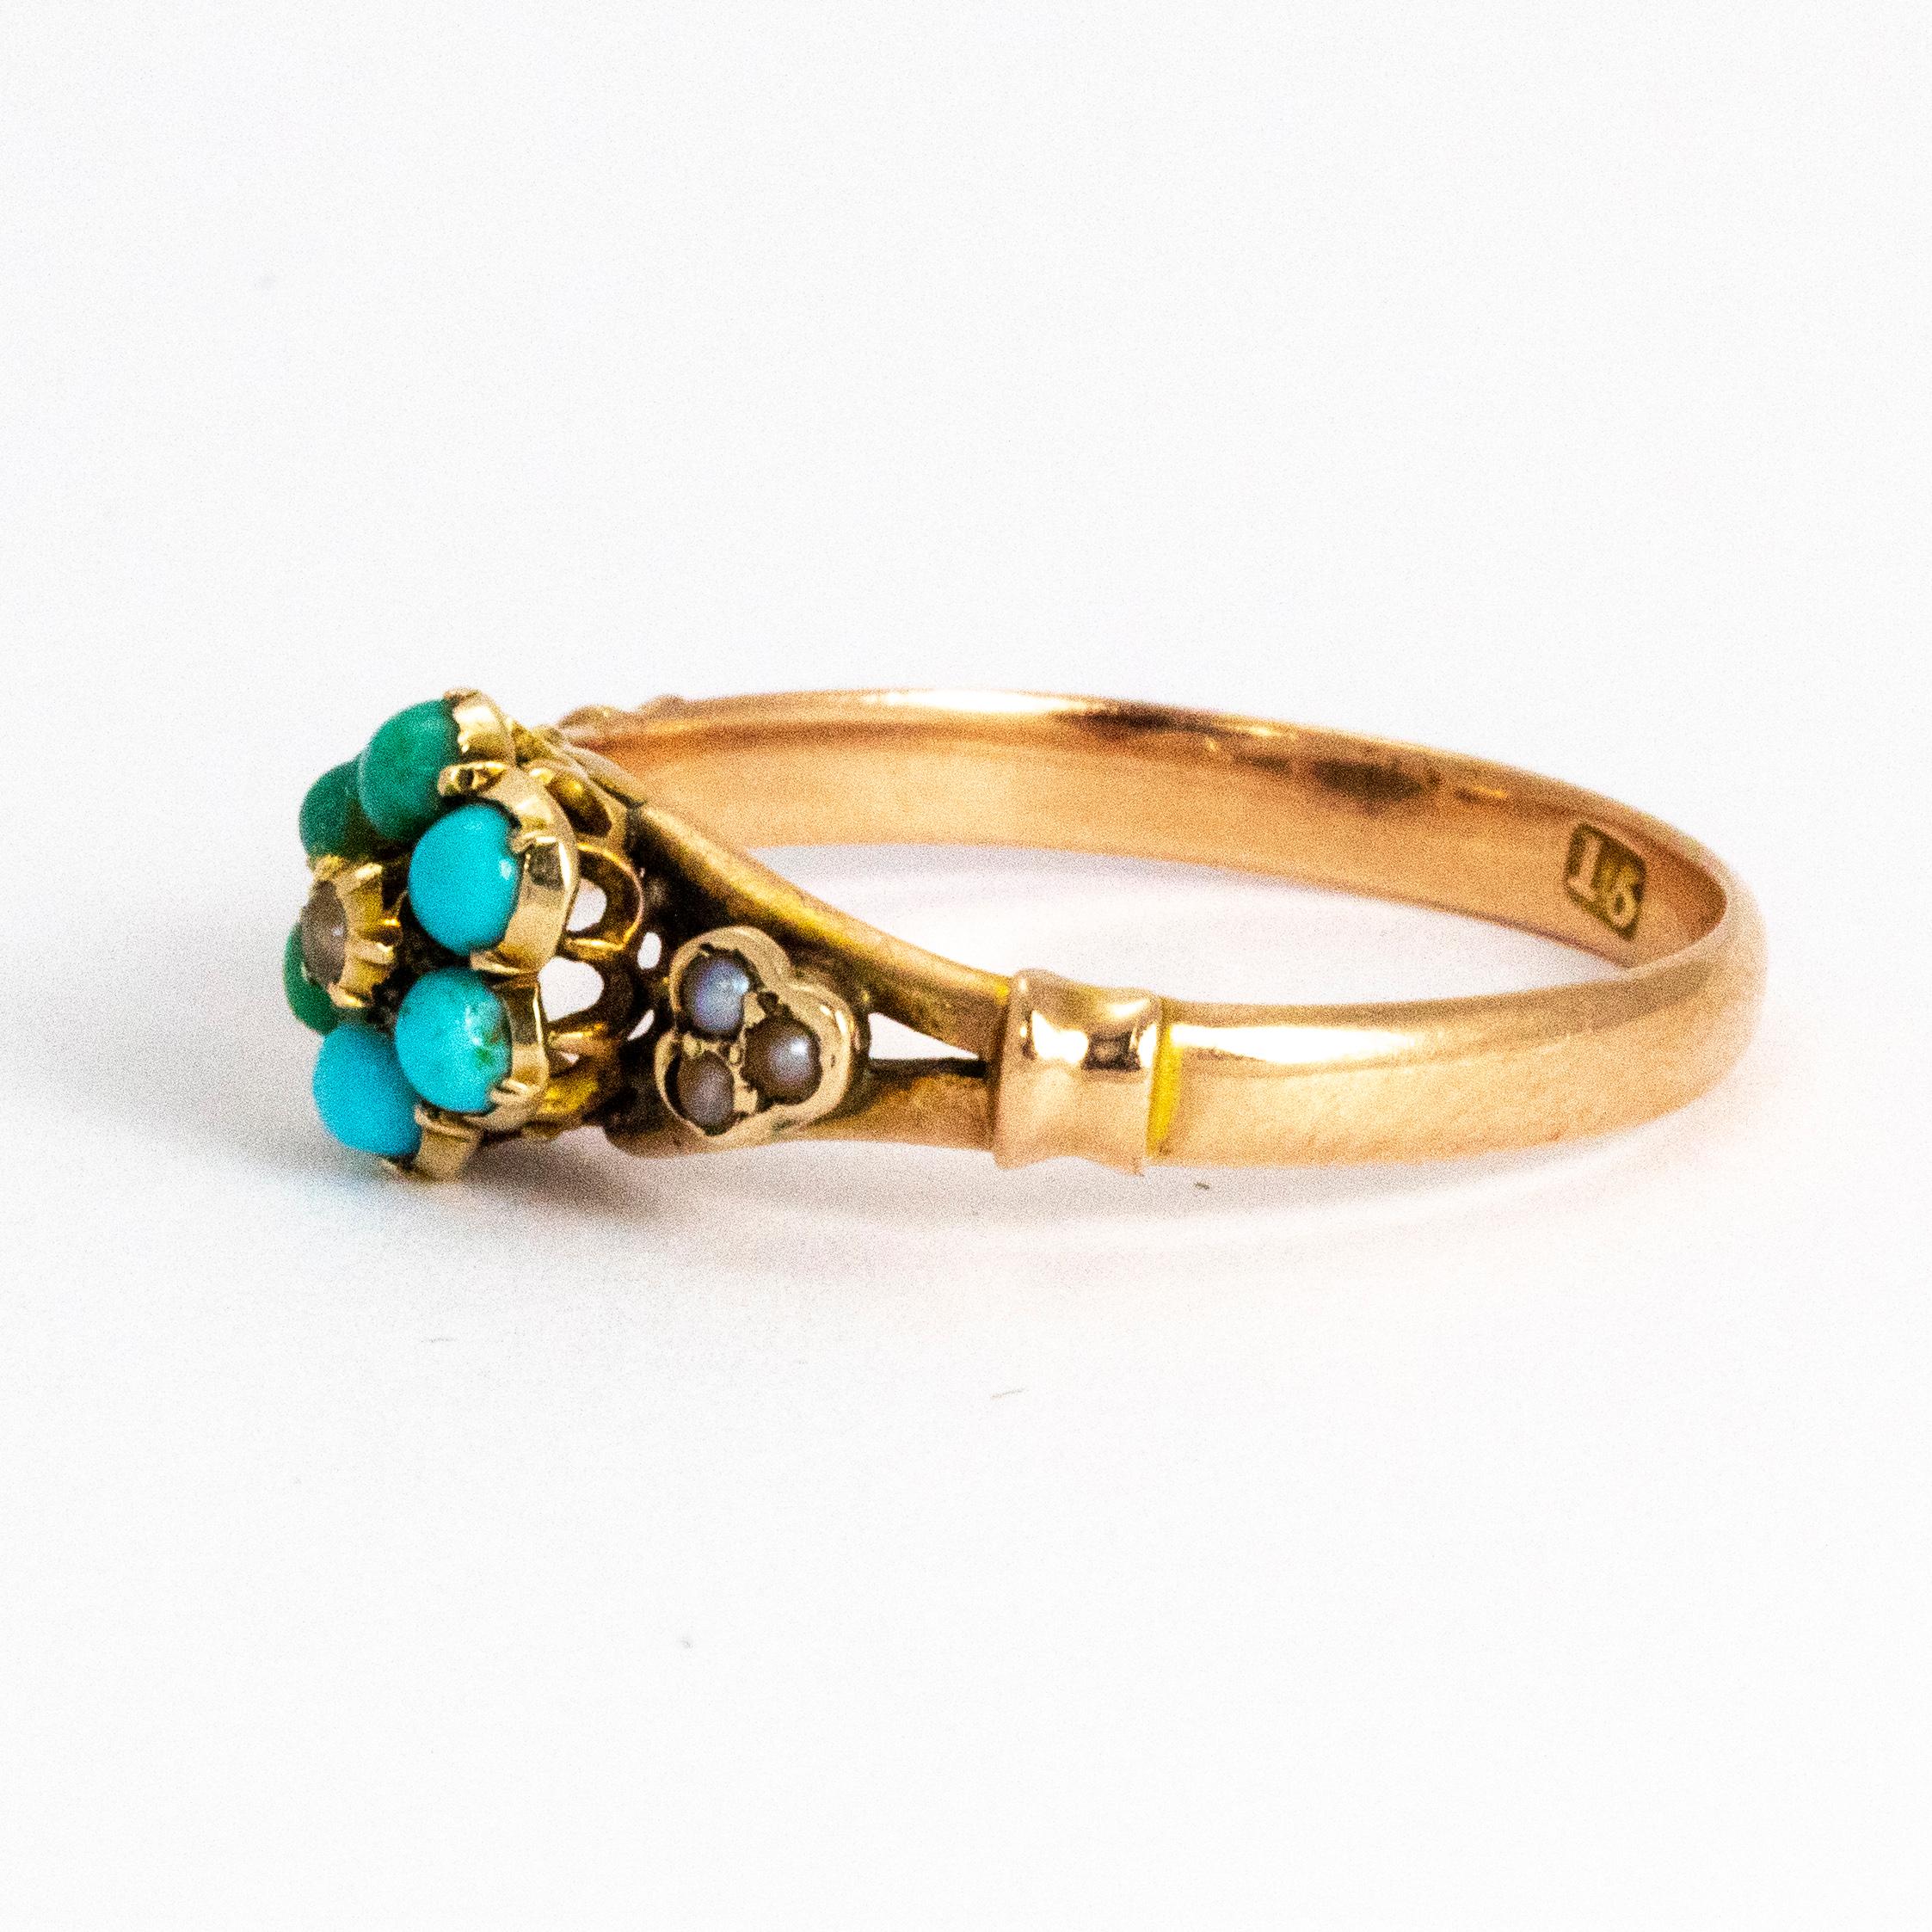 Beautiful mid 19th century turquoise cluster ring. In the middle of the turquoise cluster sits a dainty little pearl and this ring also features pearl shoulders. Modelled in 15ct gold, this ring has a beautiful openwork setting on which the cluster